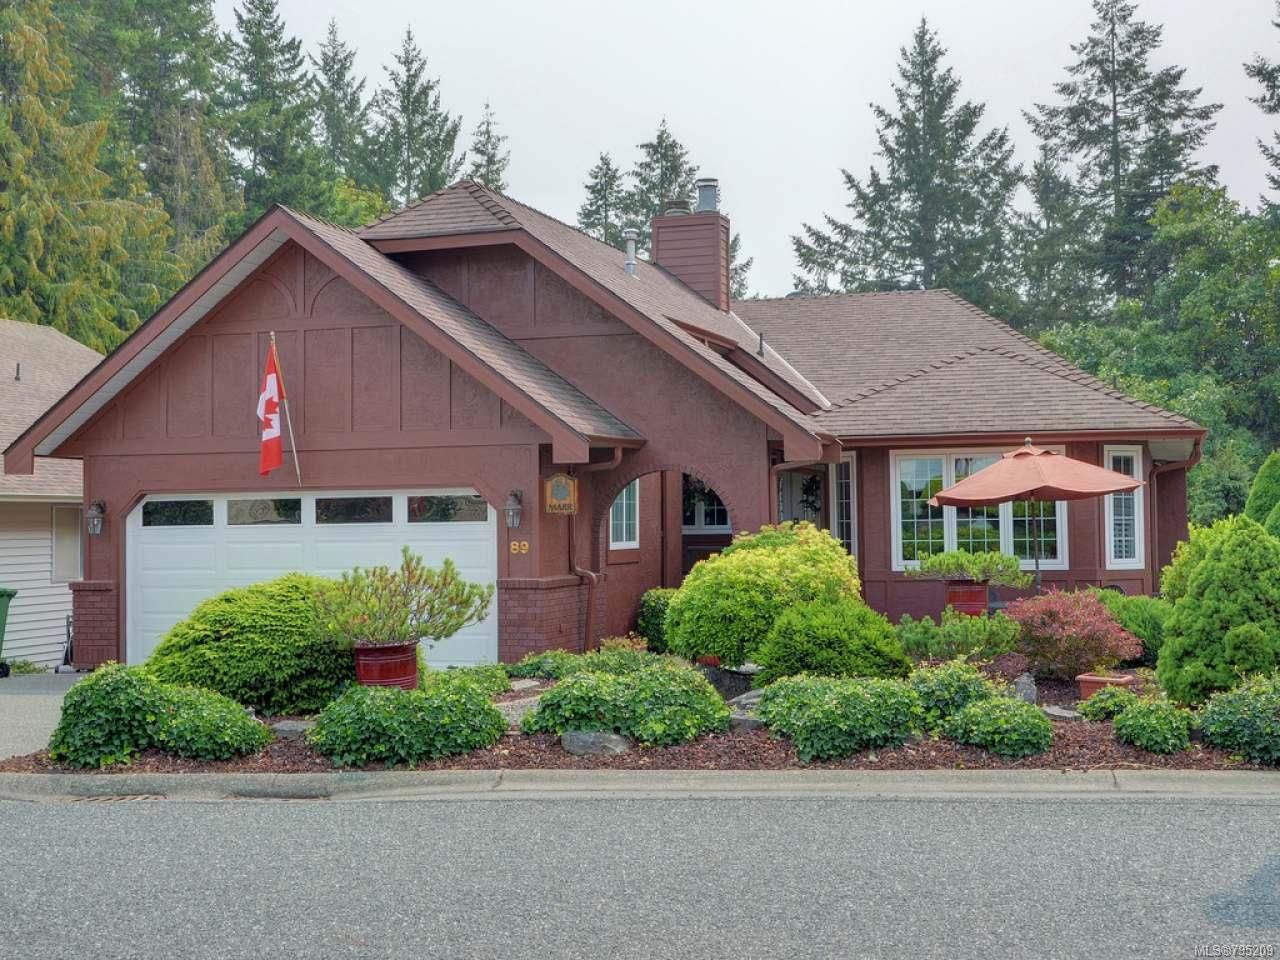 Main Photo: 89 Marine Dr in COBBLE HILL: ML Cobble Hill House for sale (Malahat & Area)  : MLS®# 795209